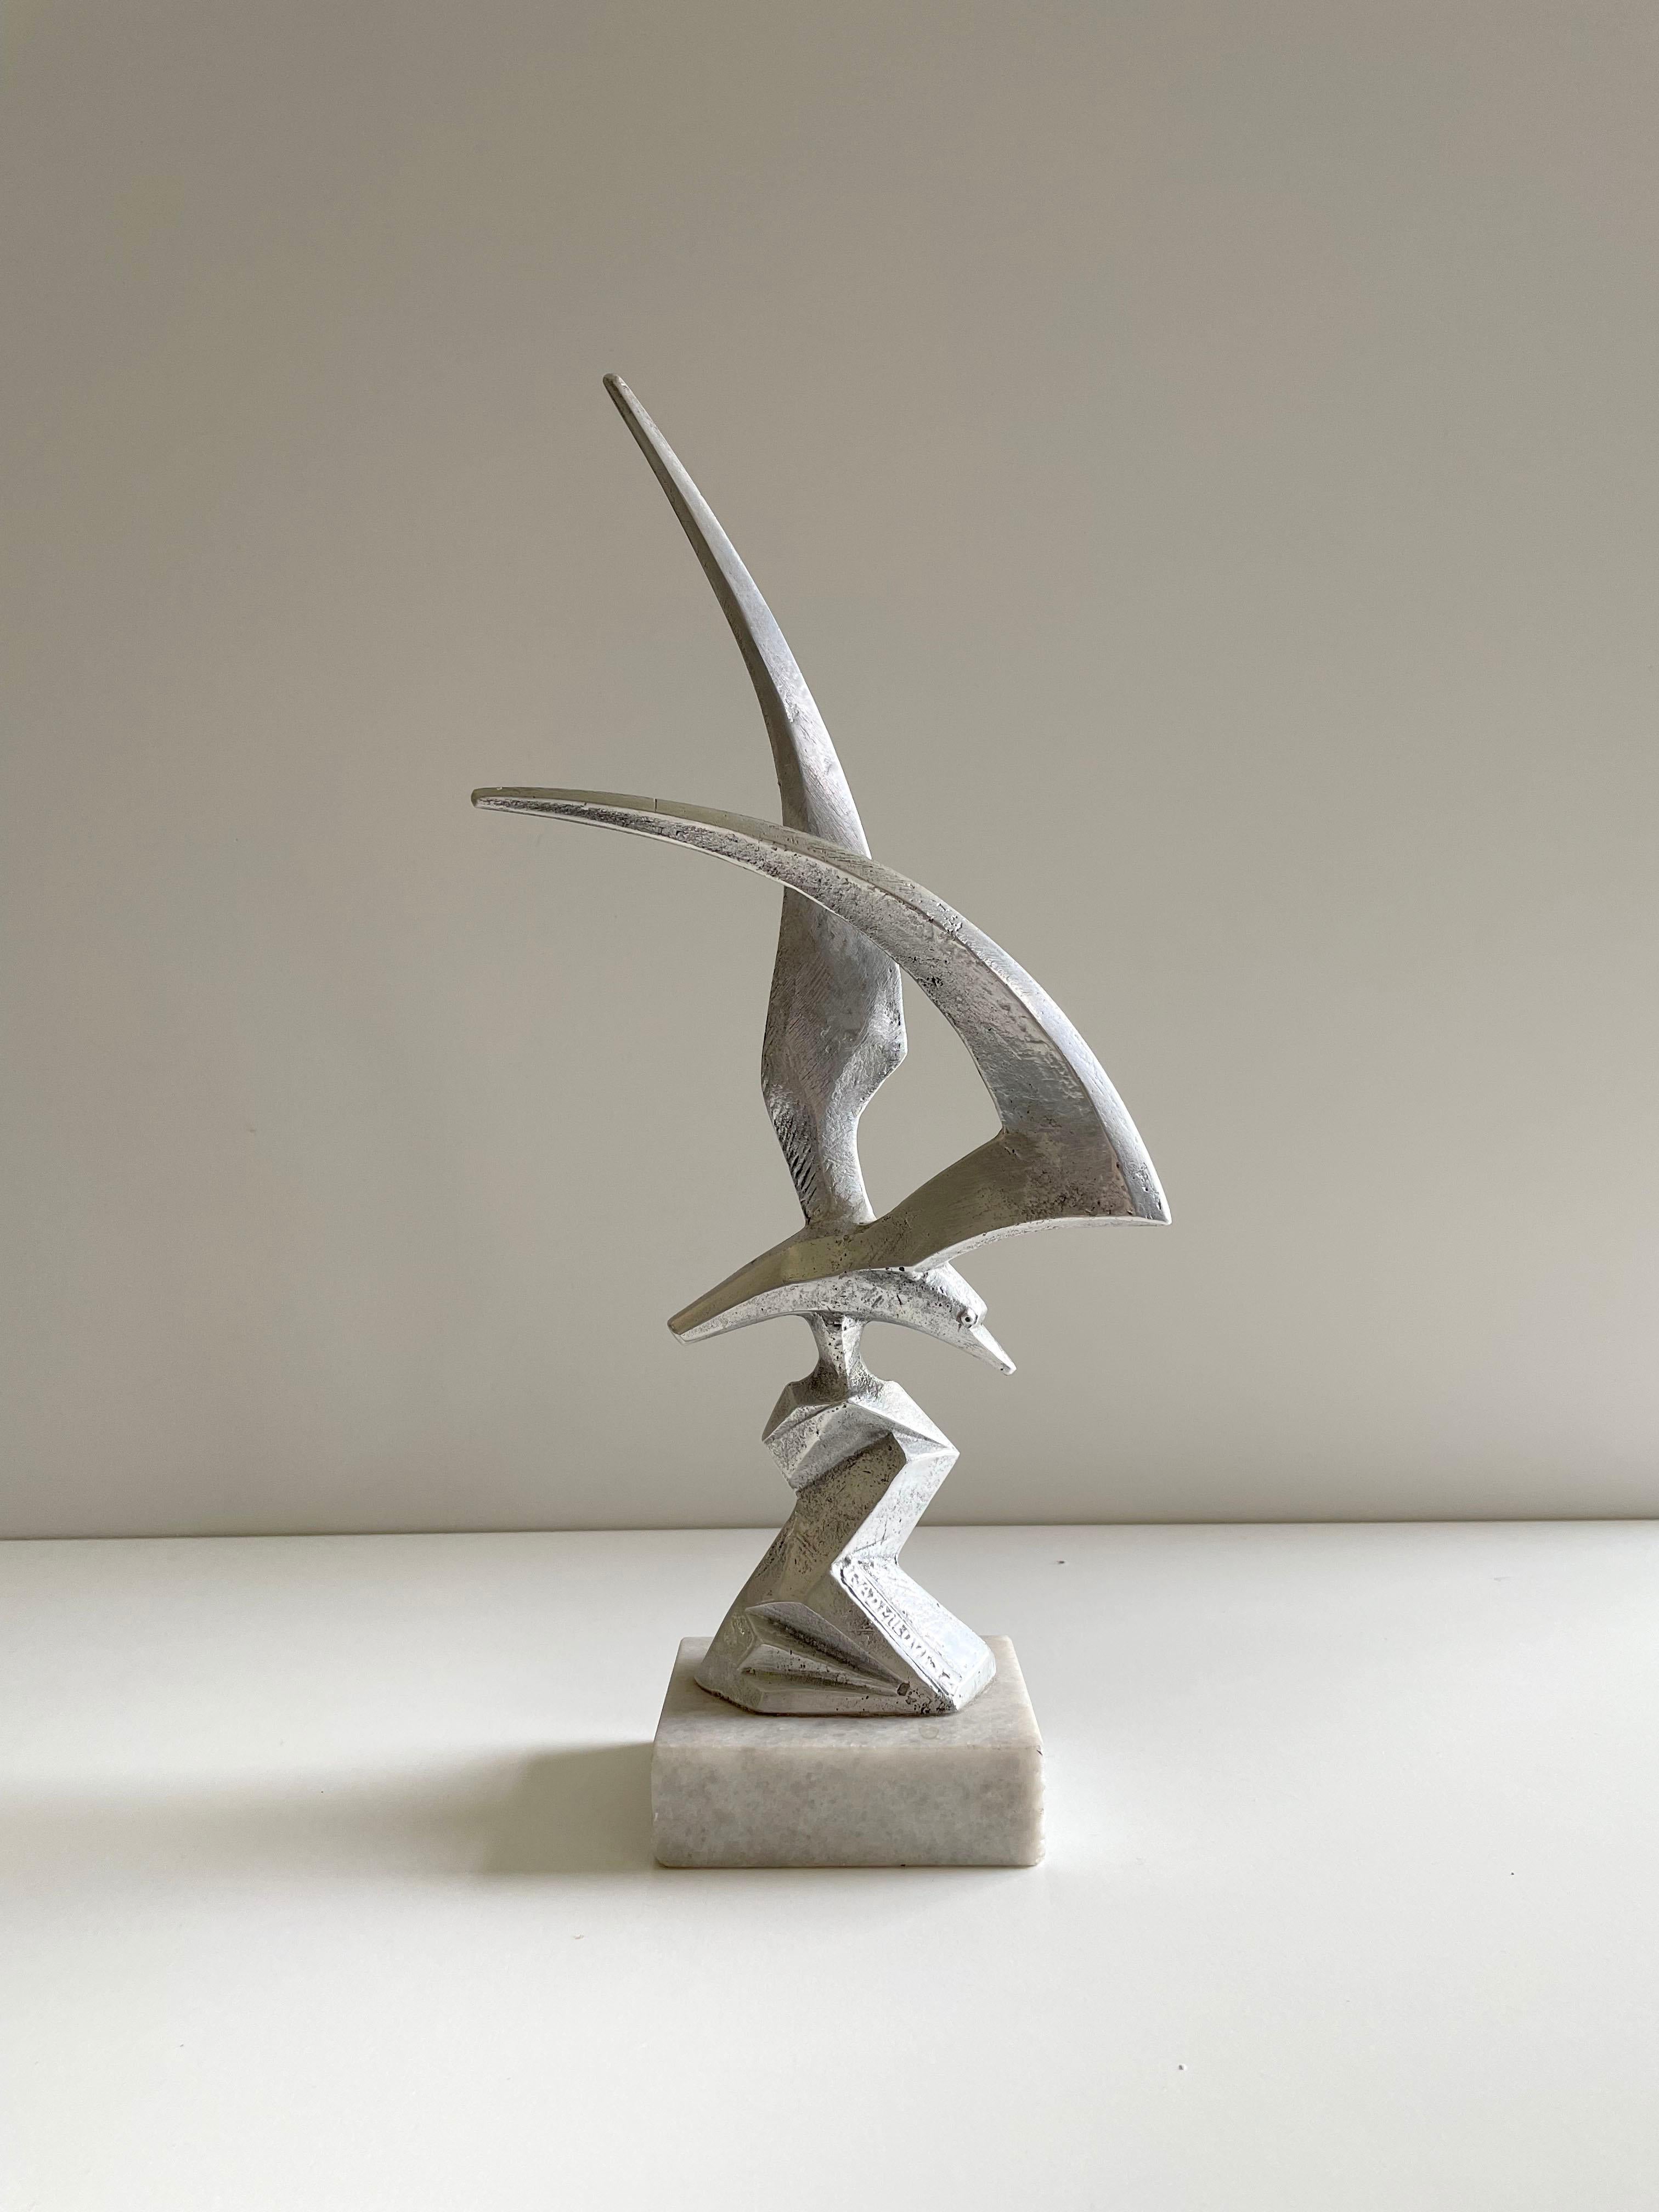 Mid-century modern statue of a sea-gull made of aluminum (duralumin - aluminum alloy) and mounted on the white marble base

Signed 'Radmilovic' and 'Jugoplastika'

Age: 1960s/1970s

Dimensions: c. 39 x 21 x 8 cm (H/W/D)
Weight: 1.32 kg

The